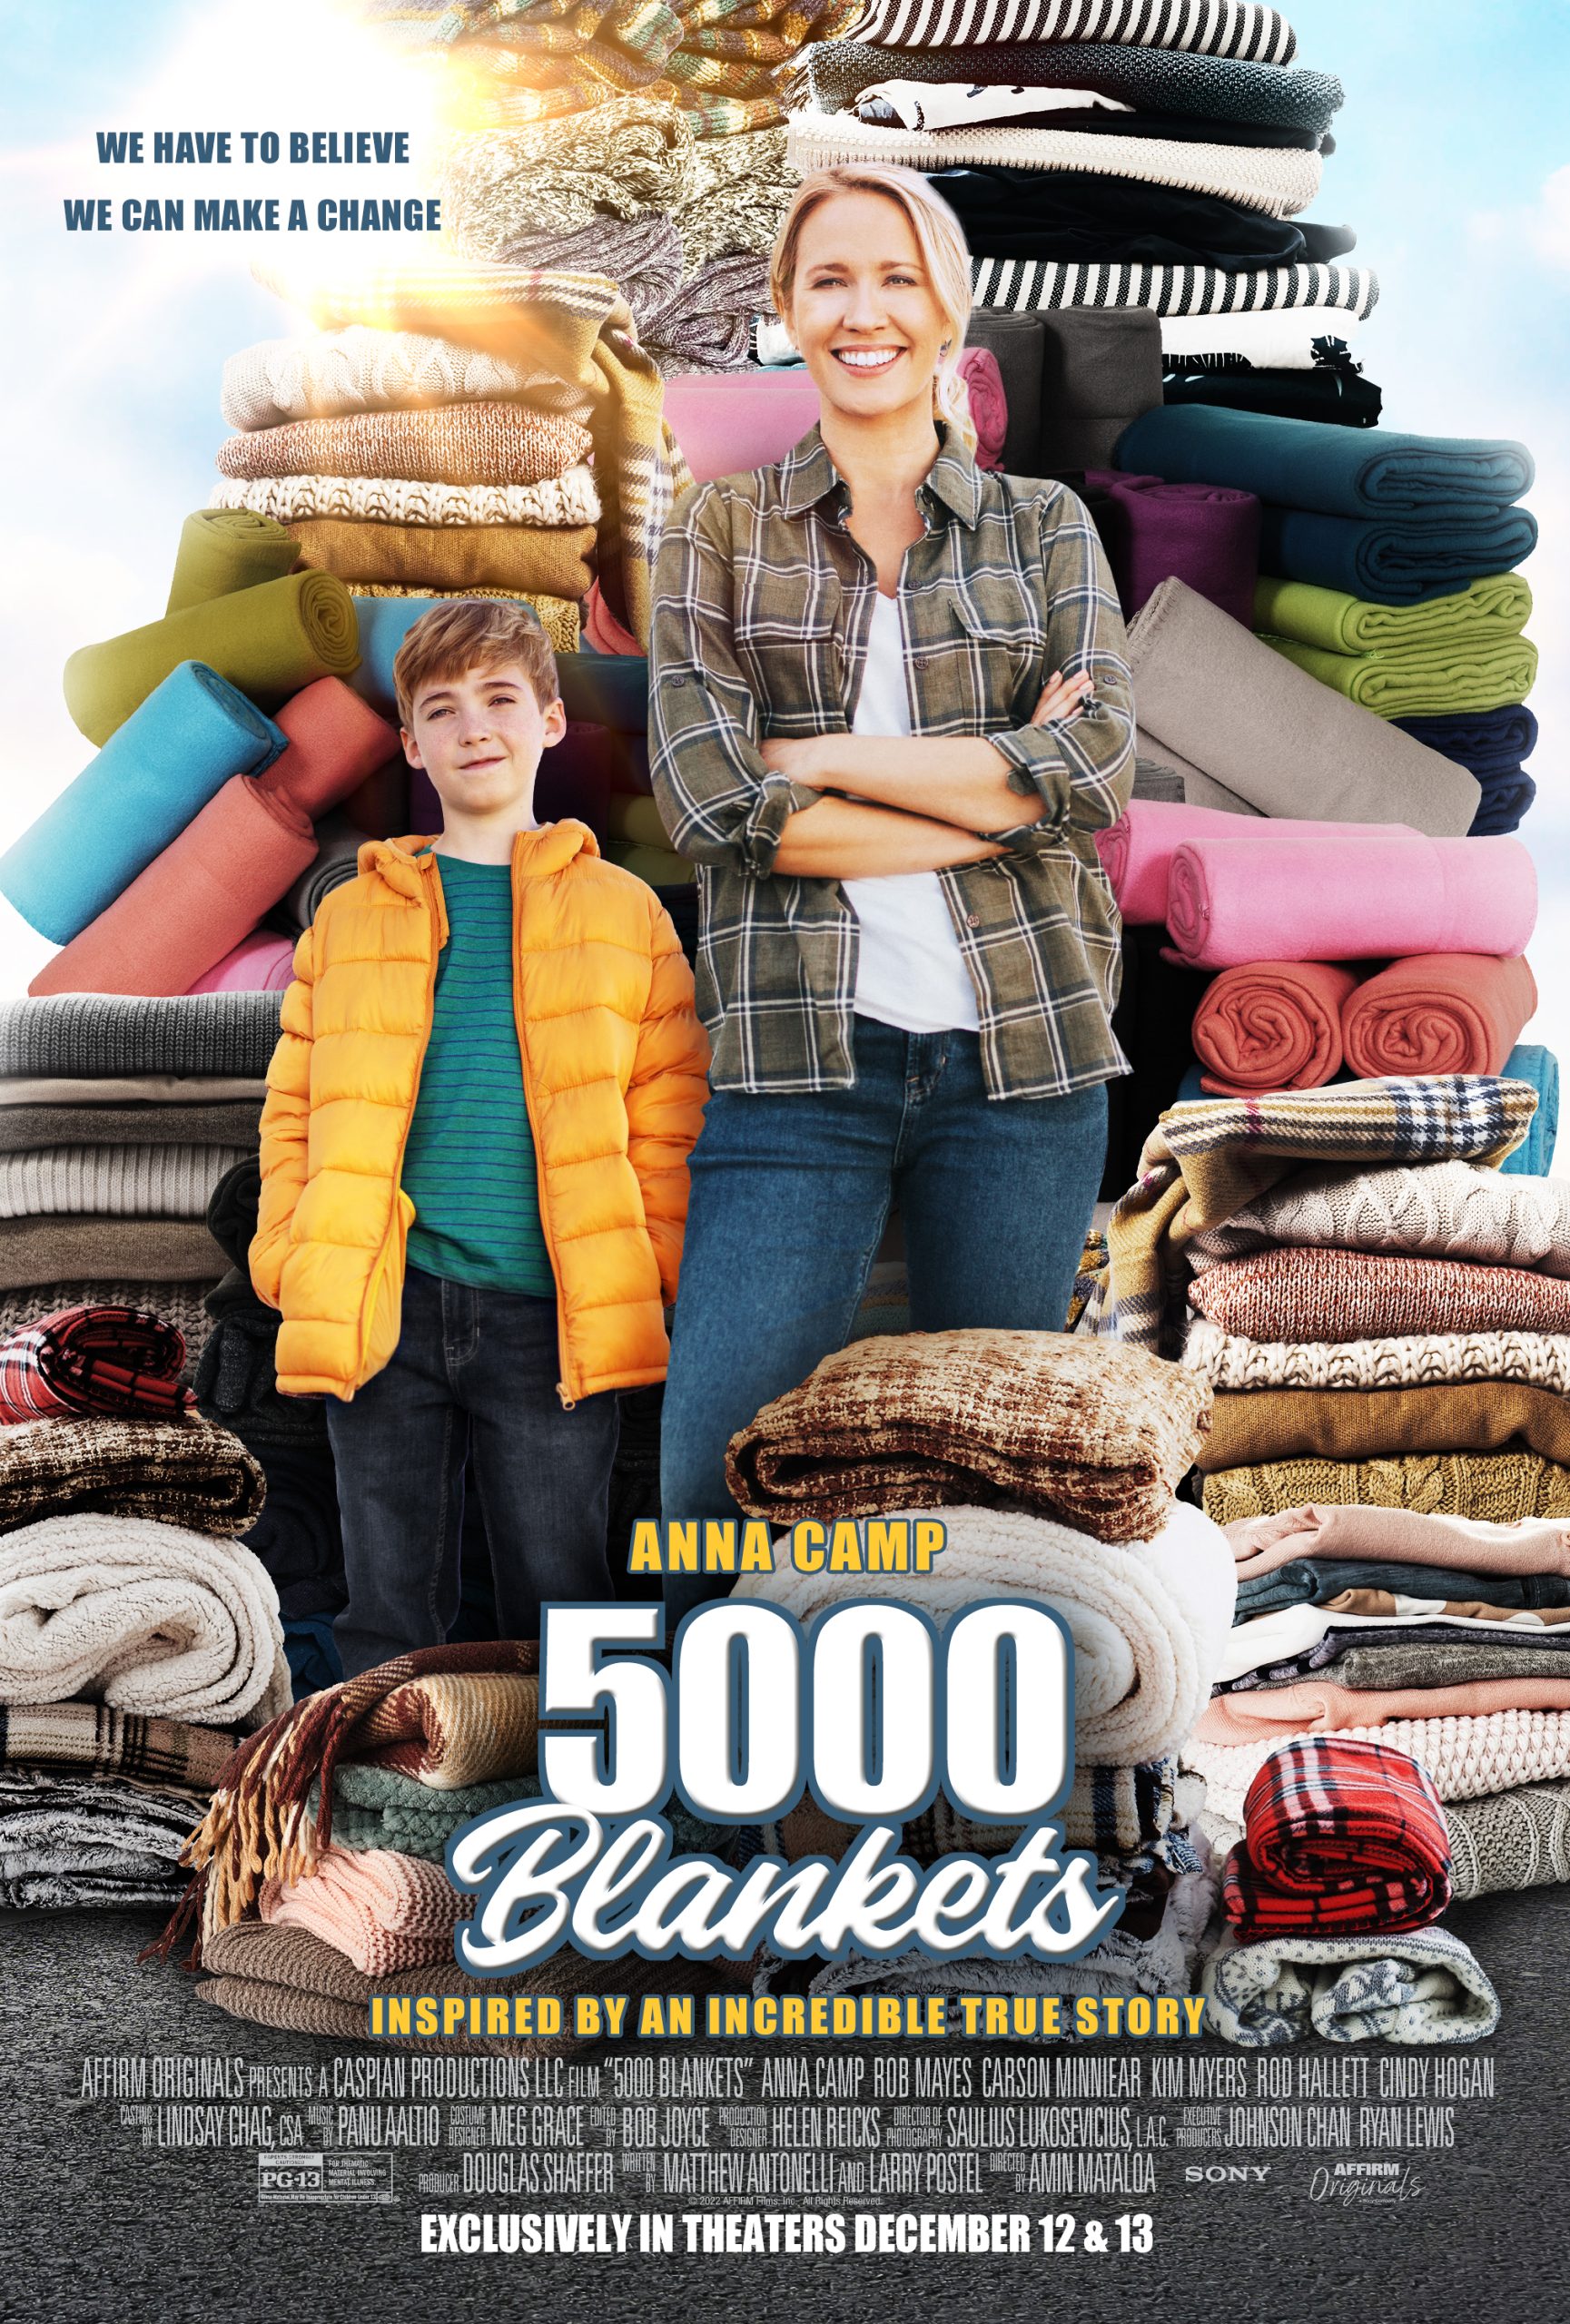 Catch 5000 BLANKETS exclusively in theaters for two days only! December 12 & 13.